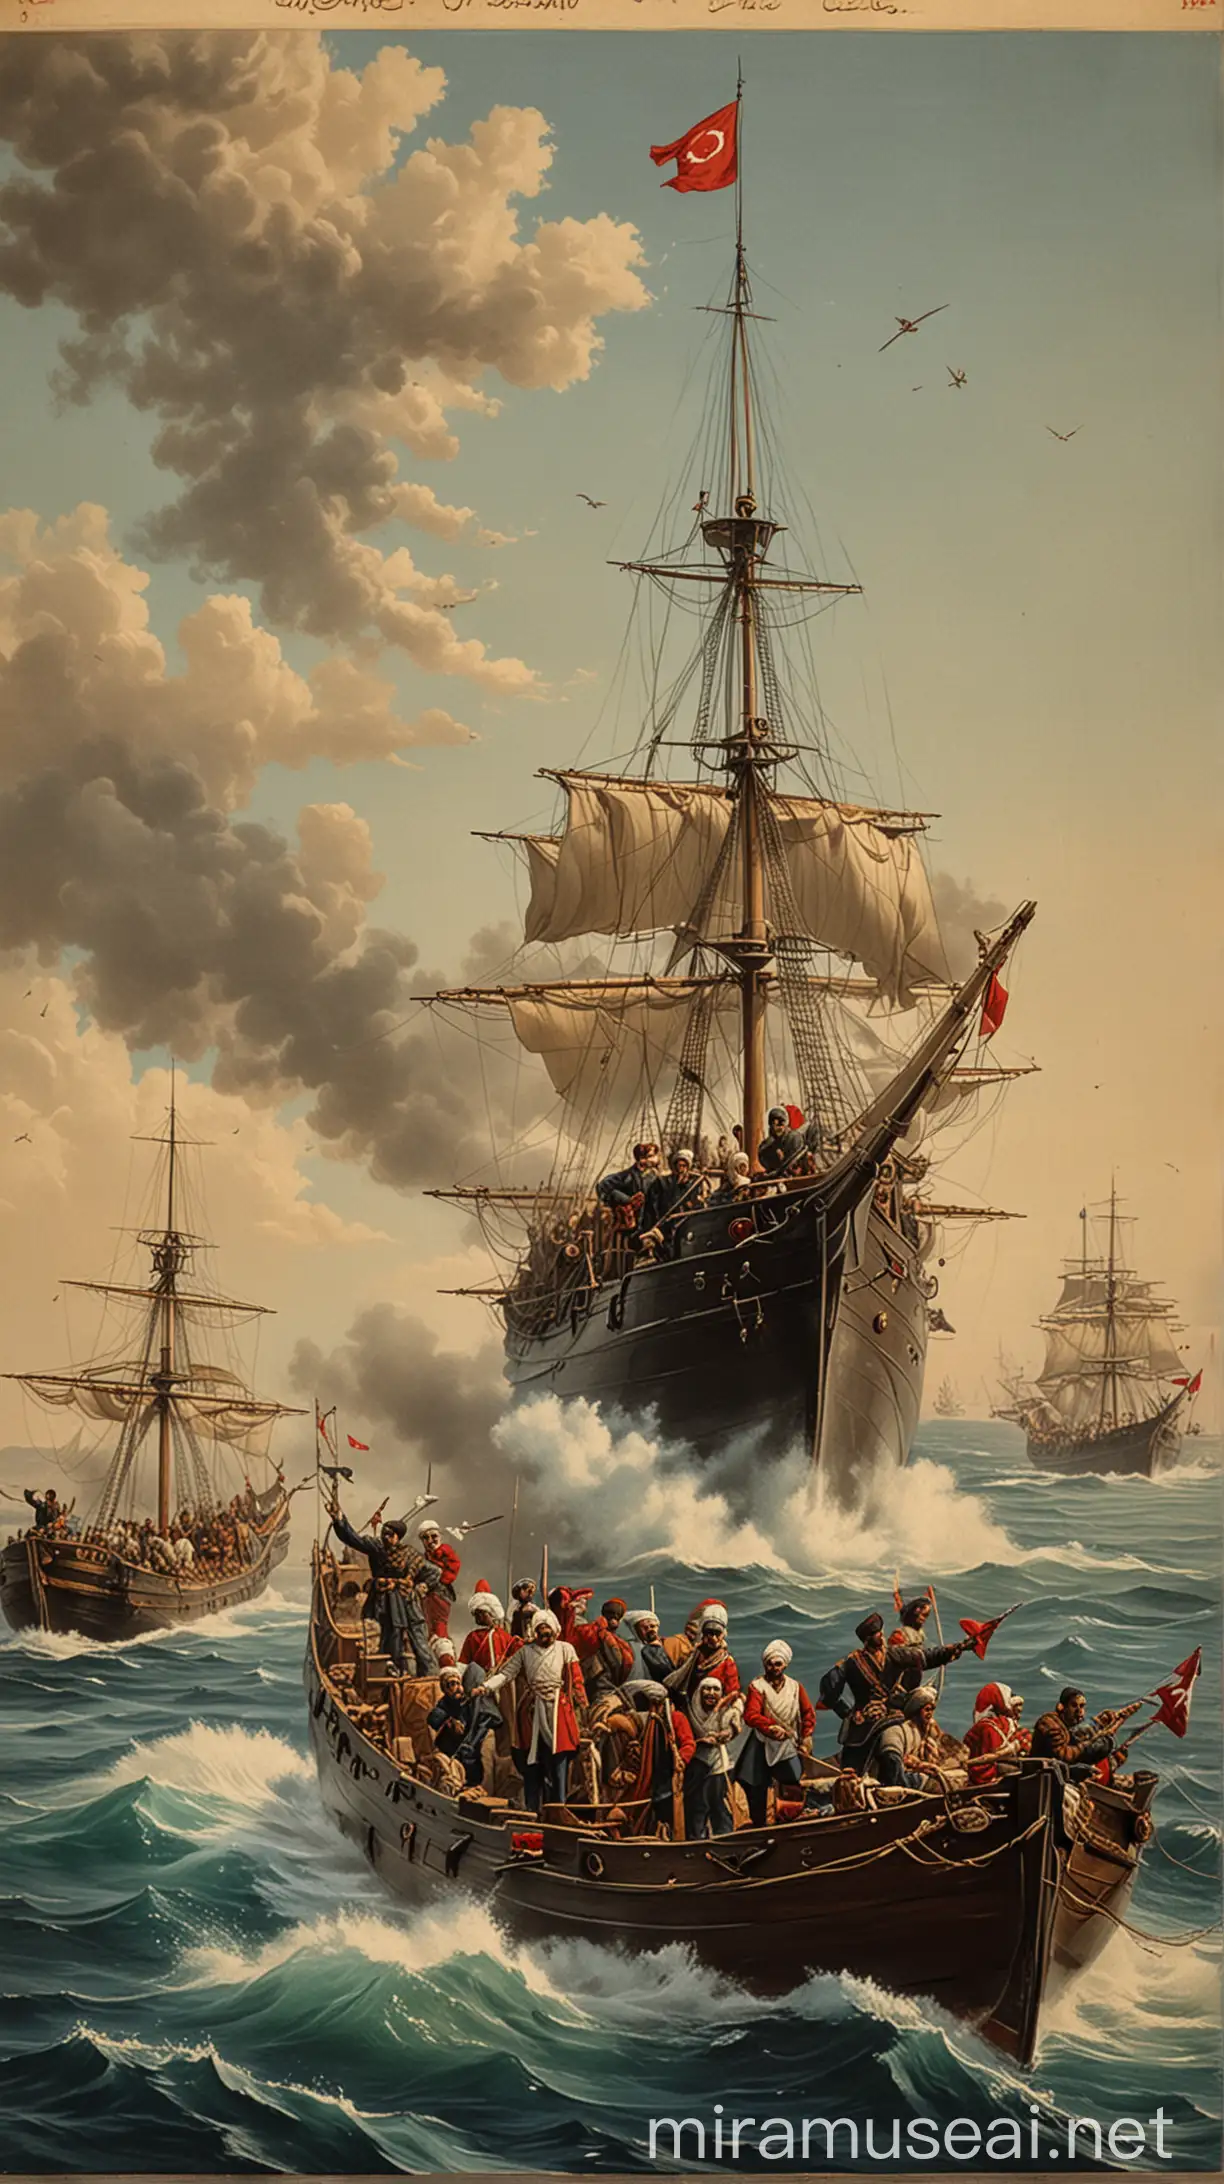 An Ottoman Navy poster or painting depicting the era when Nusret joined the Turkish Naval Forces.